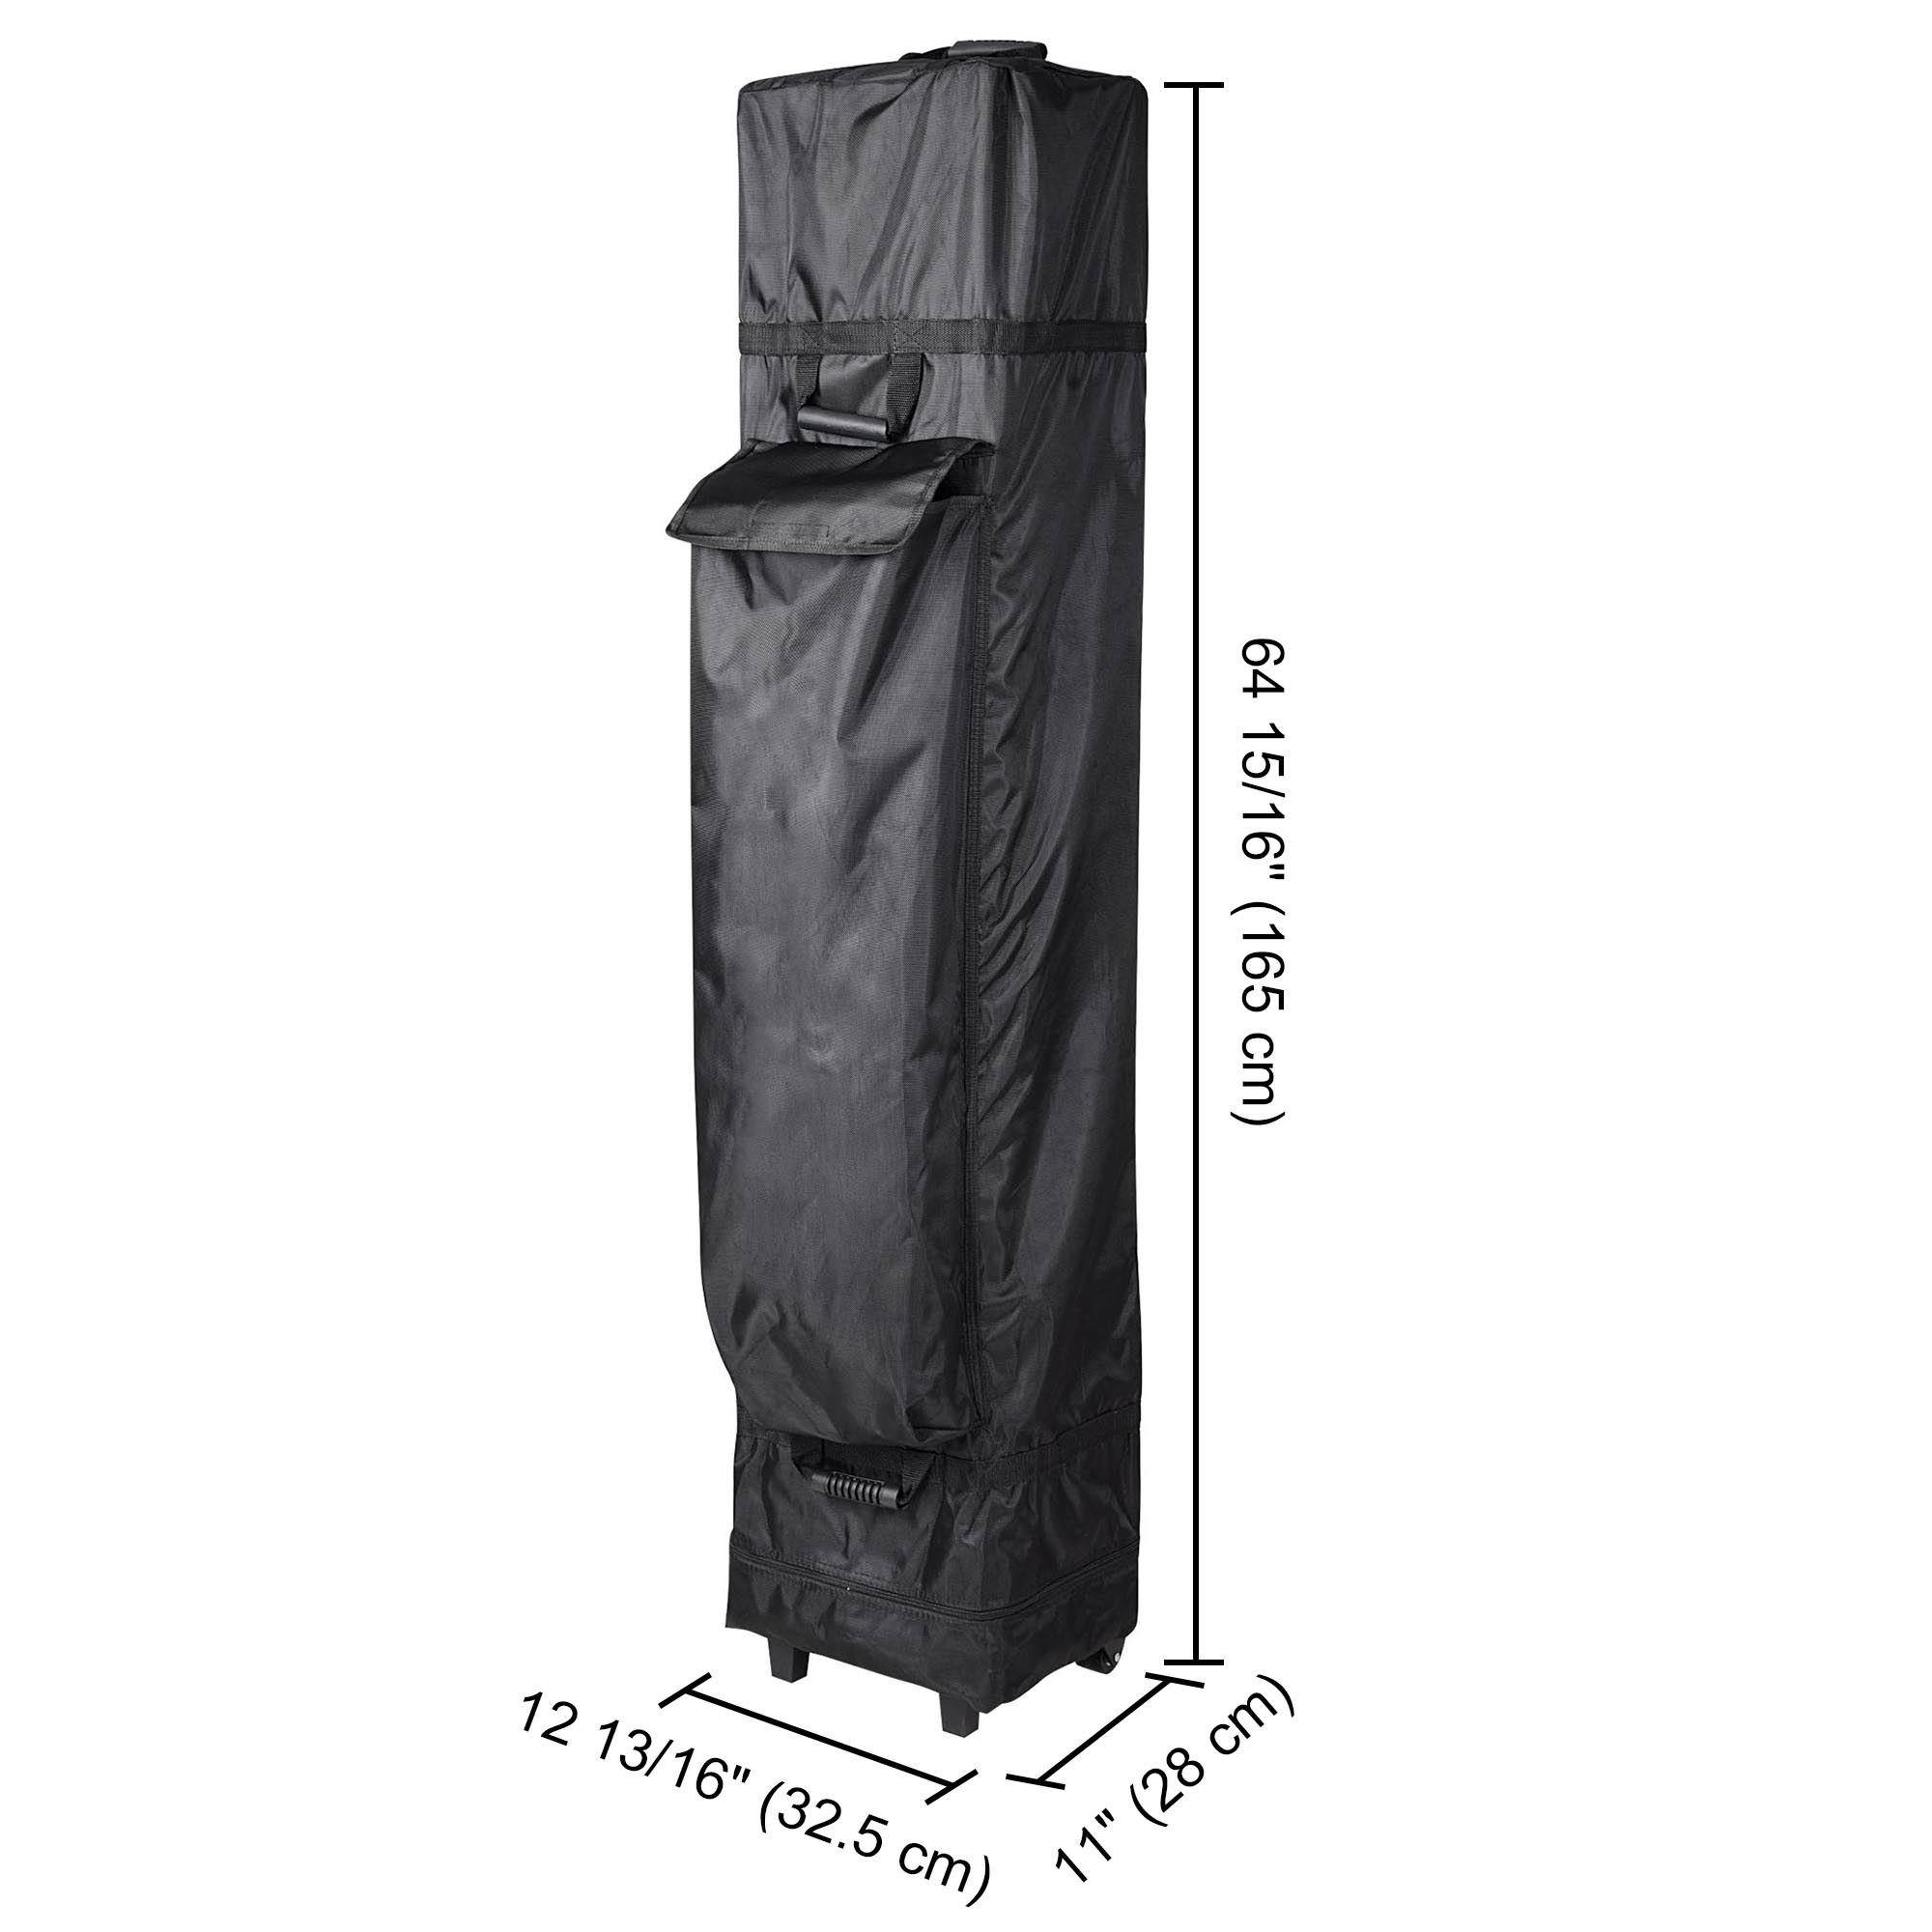 InstaHibit Universal Canopy Carry Bag Wheeled Pop Up Storage Case for 10x15ft Canopy - image 4 of 9